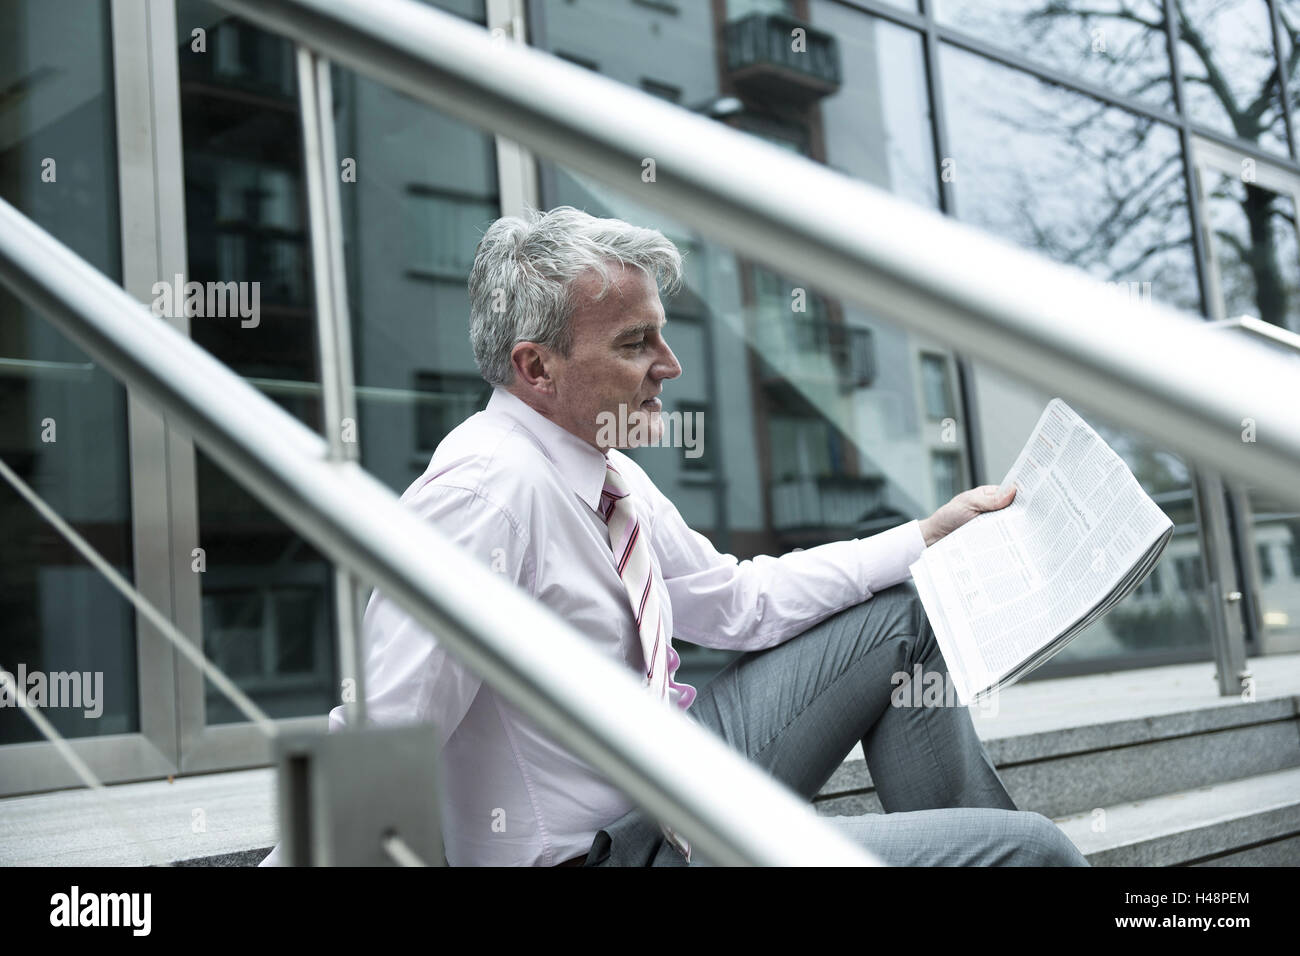 Managers, at the side, stairs, sit, read newspaper, people, man, newspaper reading, Bestager, business, Stock Photo